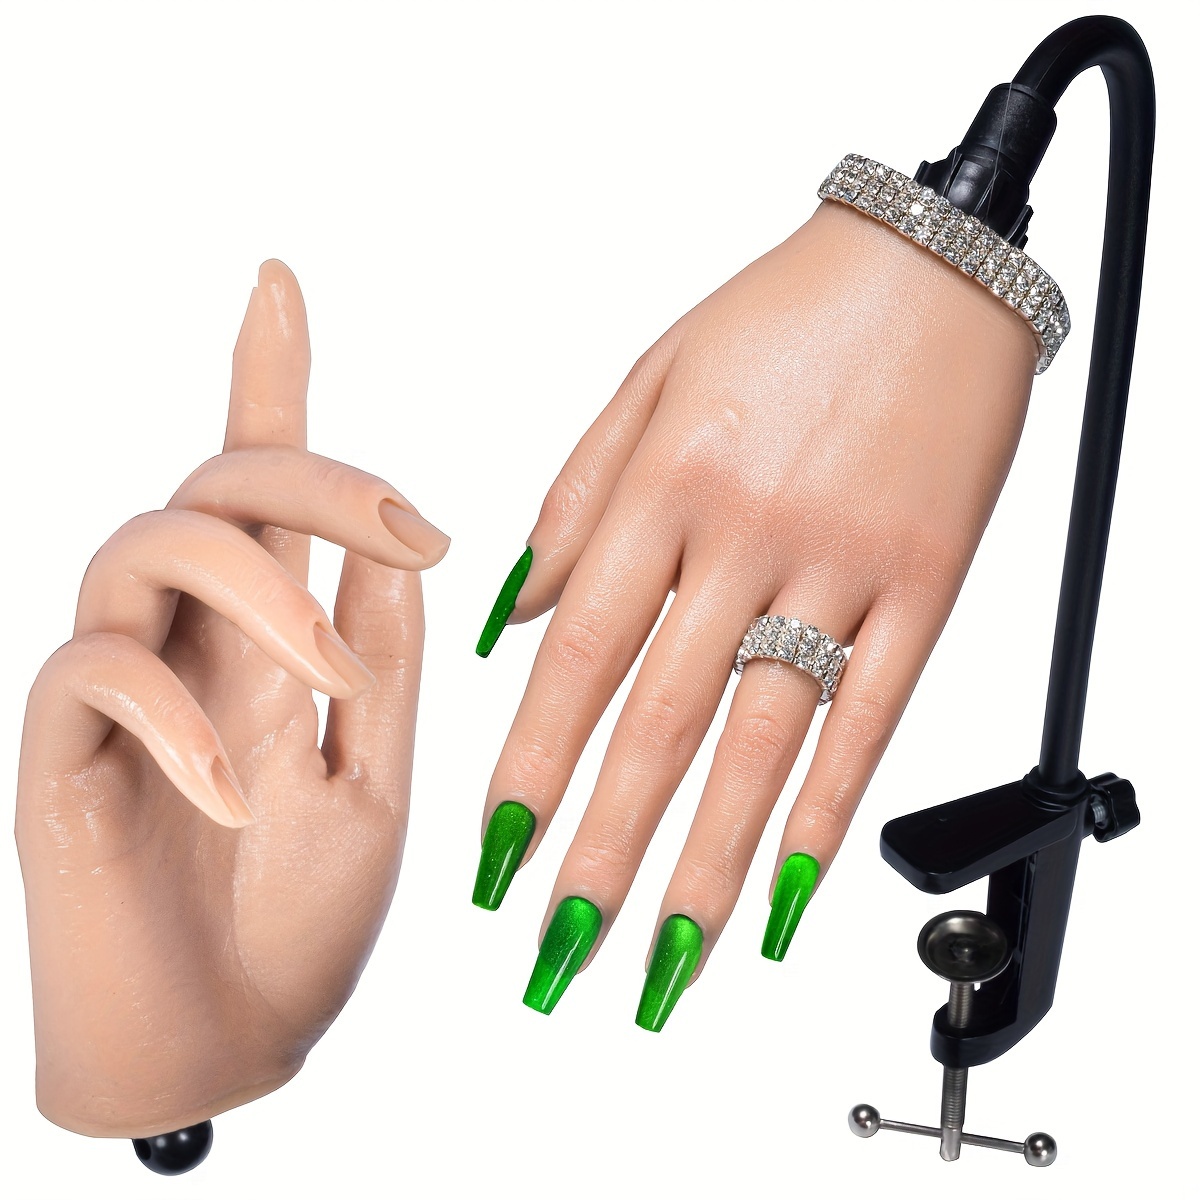 Flexible Silicone Practice Hand for Acrylic Nails Training - Soft and  Bendable Mannequin for Manicure and Fingernail Care